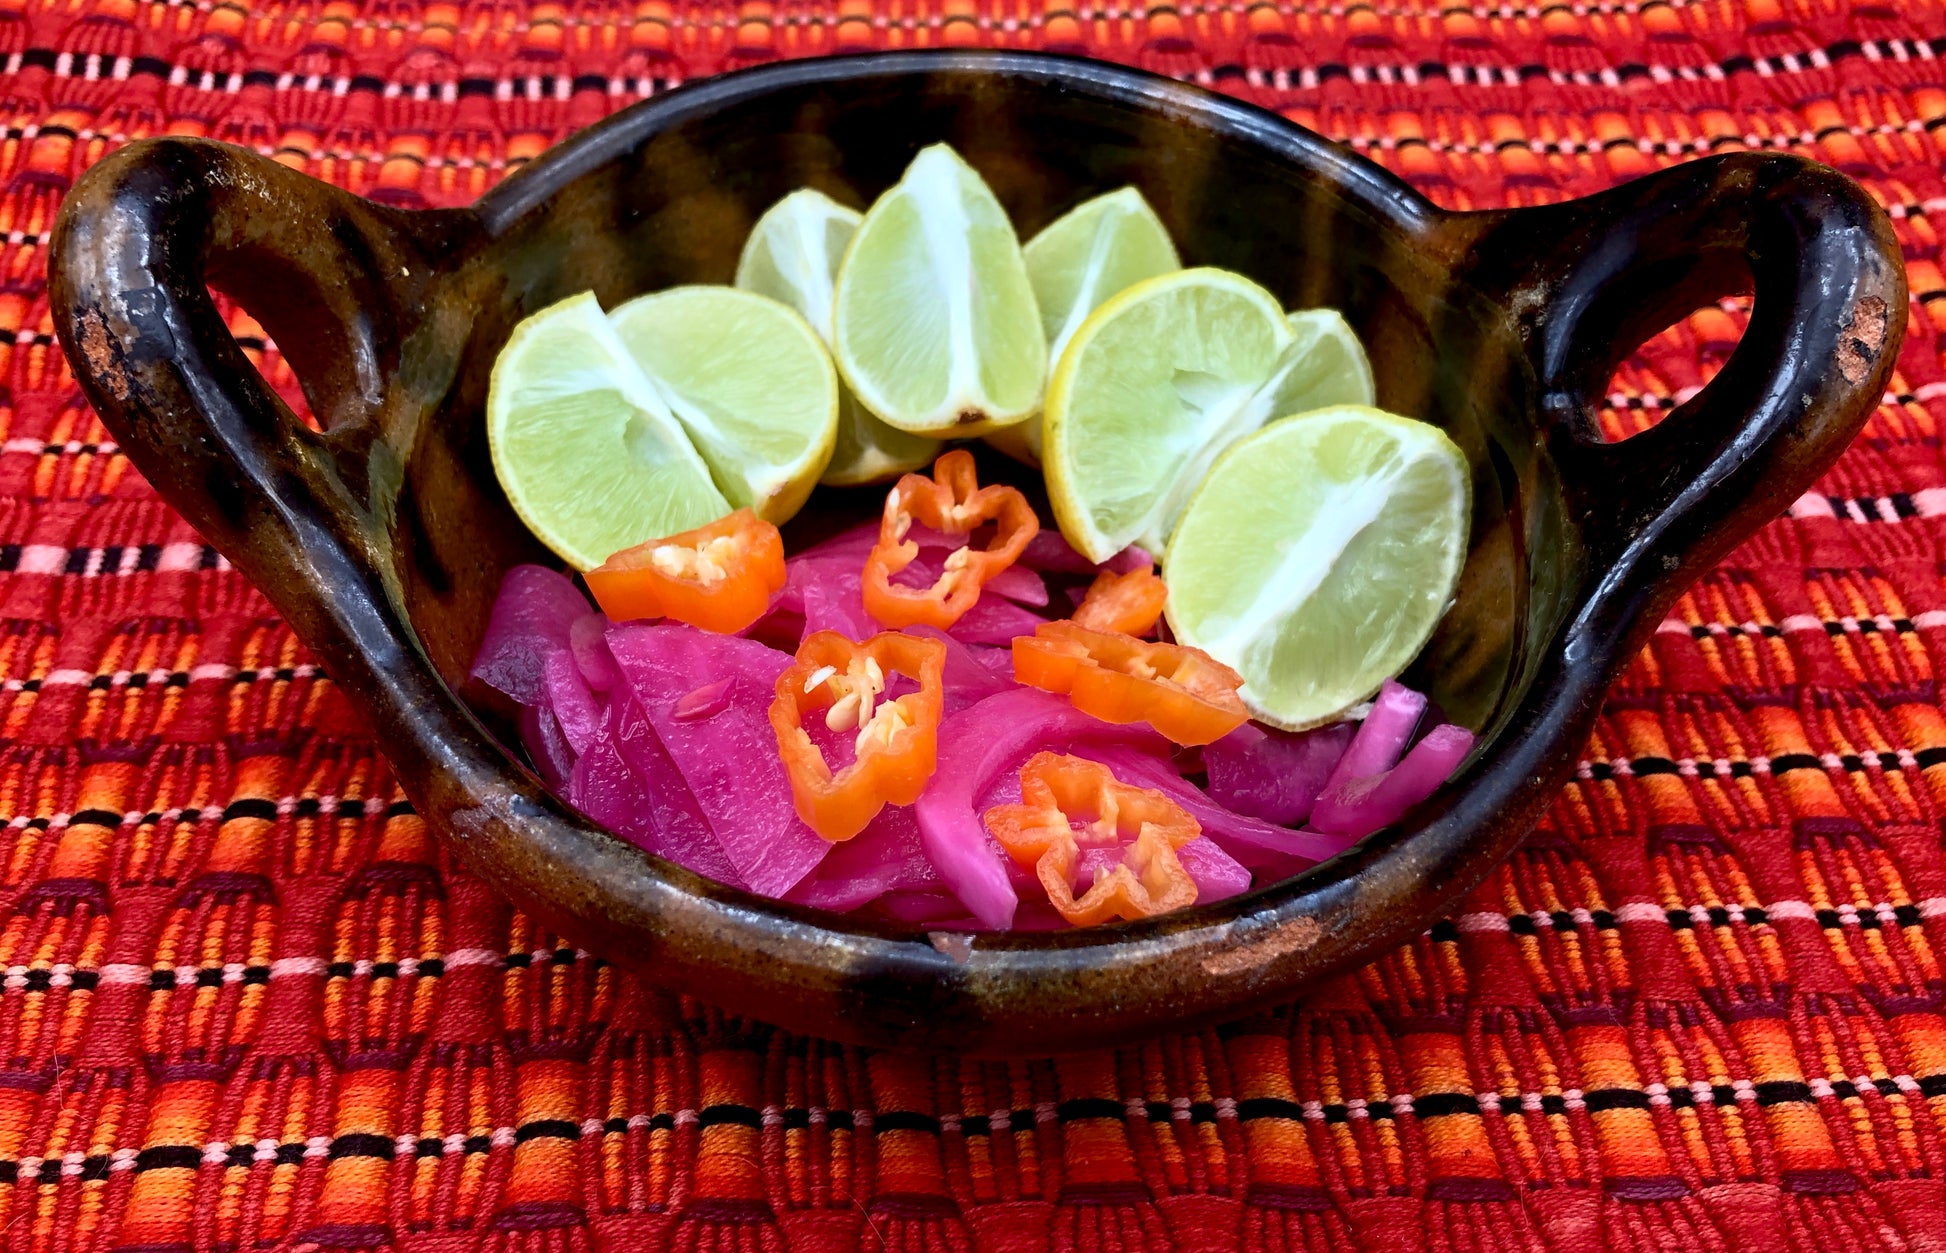 sliced habanero peppers and key limes in a dish. Our key